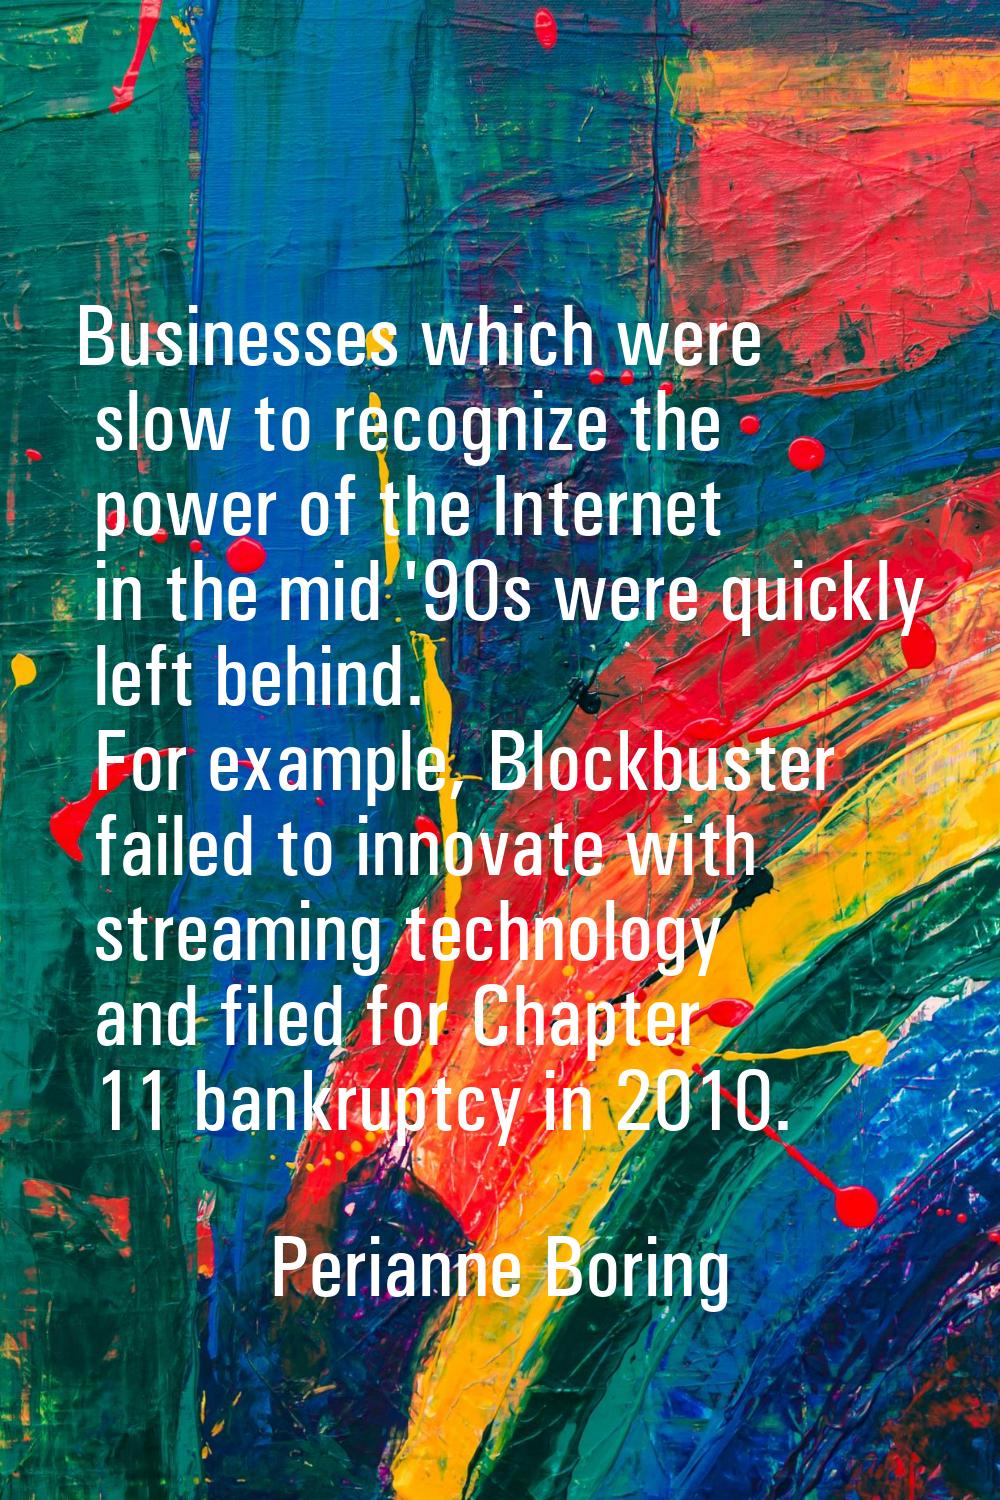 Businesses which were slow to recognize the power of the Internet in the mid '90s were quickly left